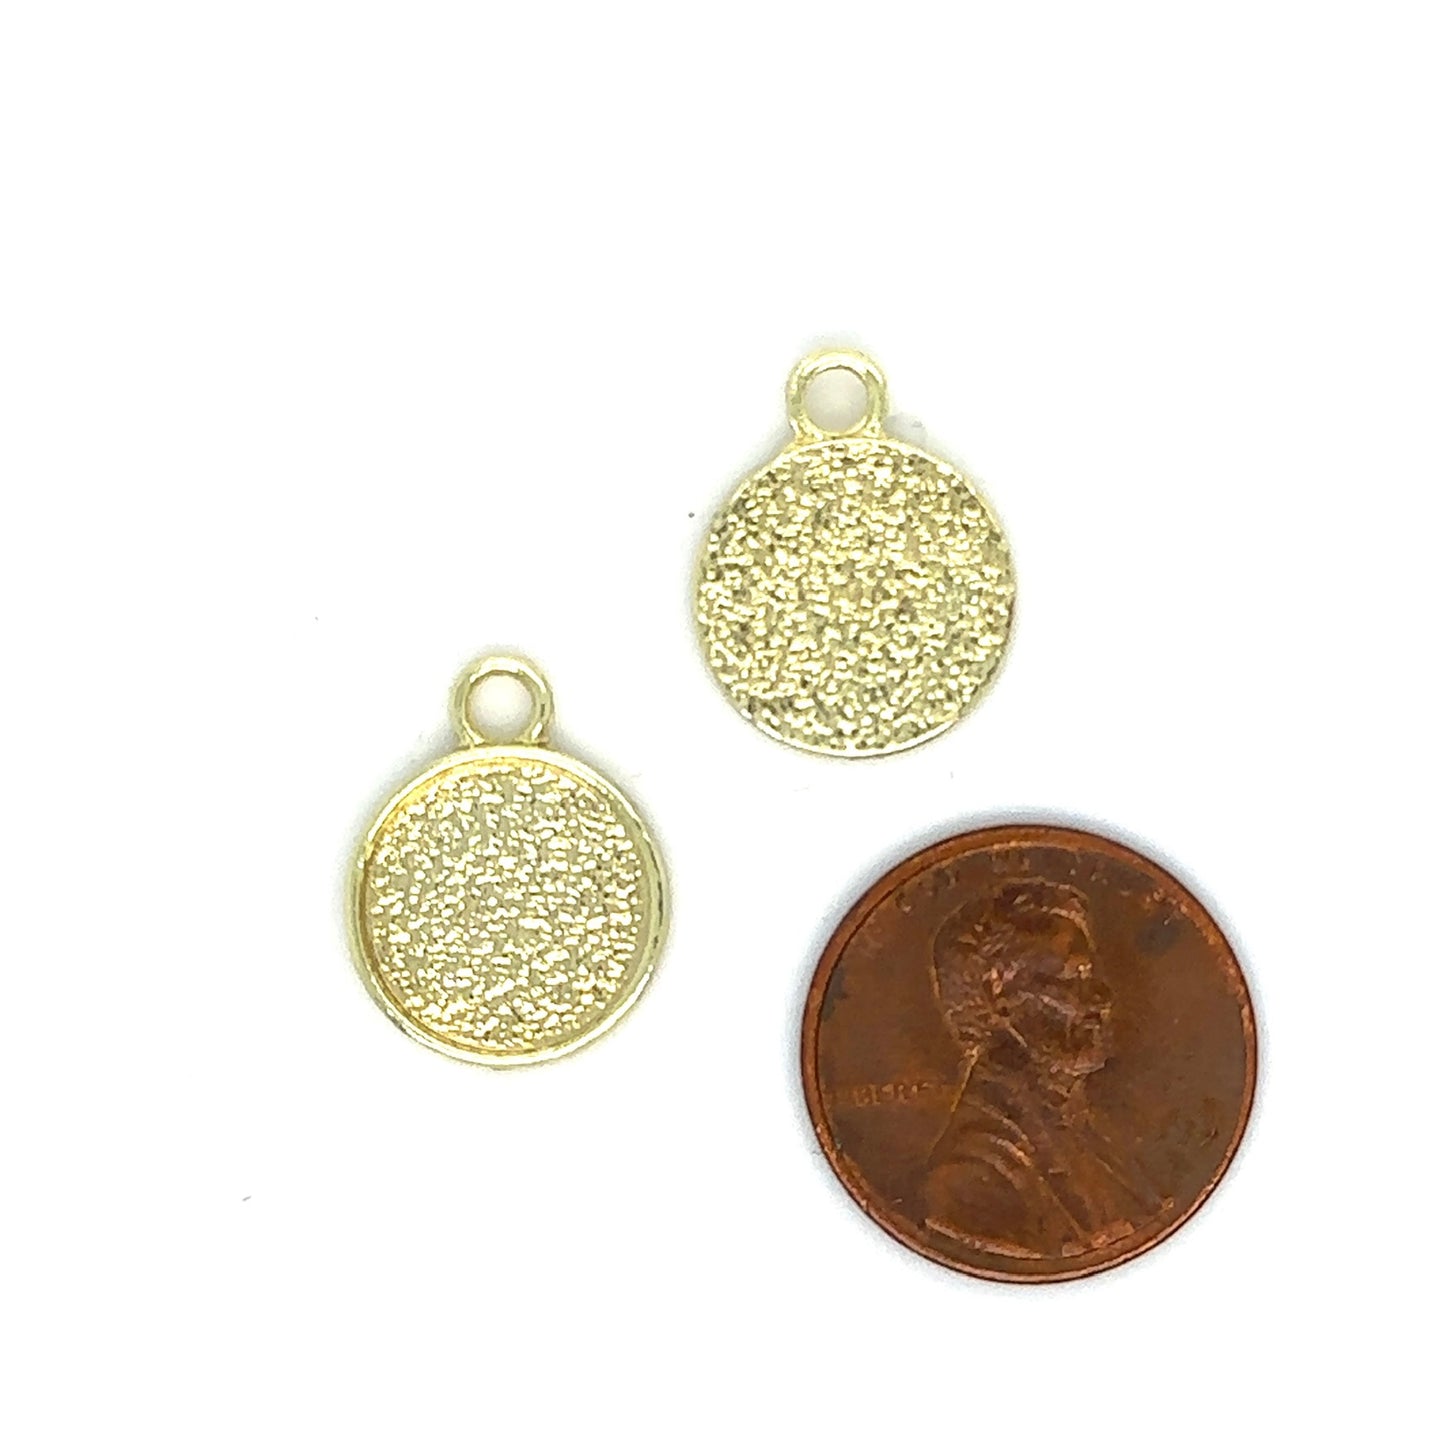 12mm small round jewelry making supplies charm light gold